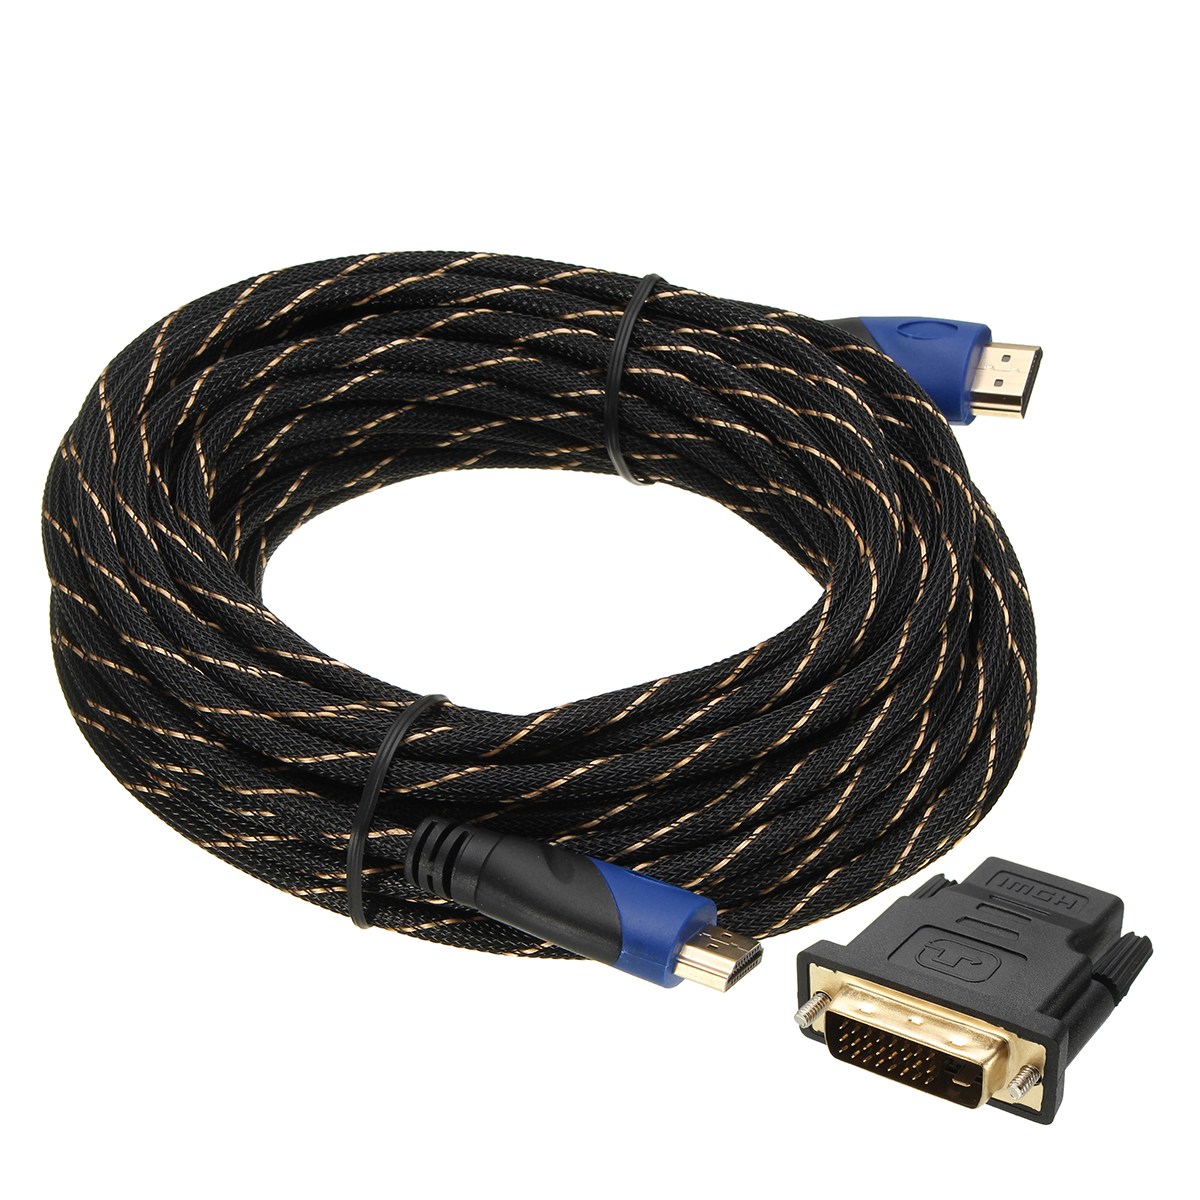 Braided HD Cable V1.4 1080P HD 3D for PS3 Xbox HDTV with DVI Connector 34